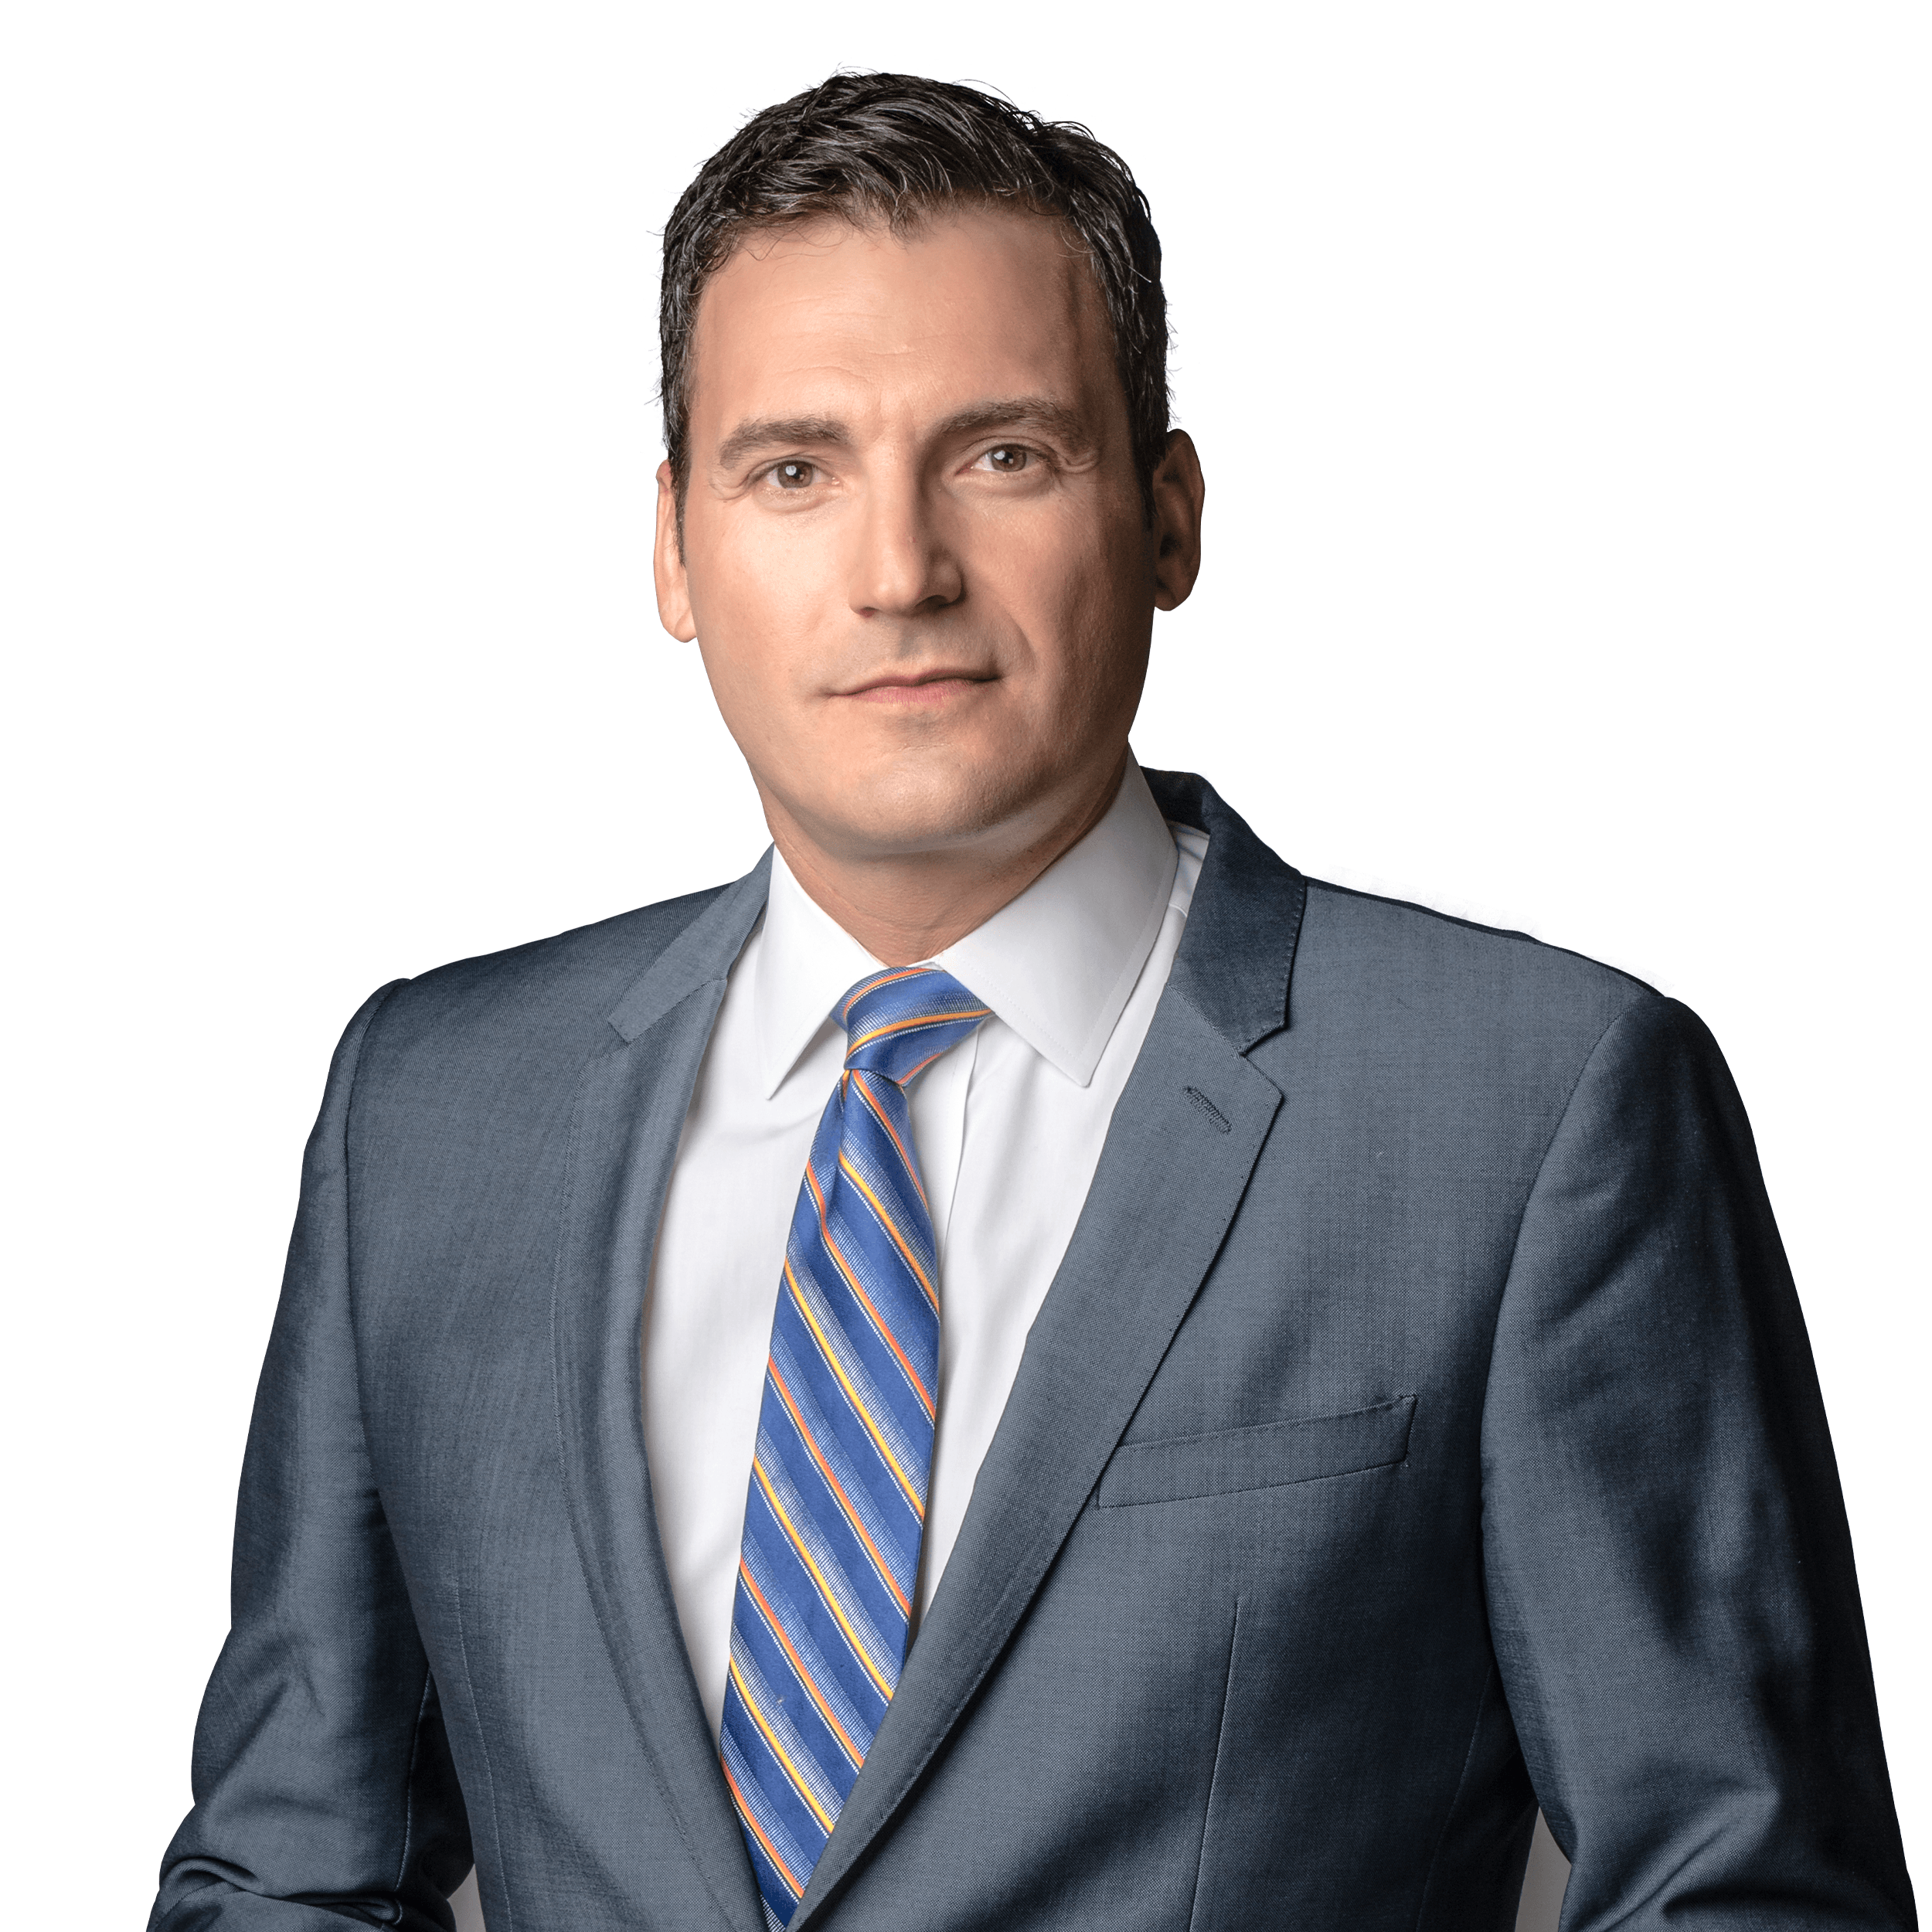 Hour 2 of The Evan Solomon Show for August, 4th, 2020